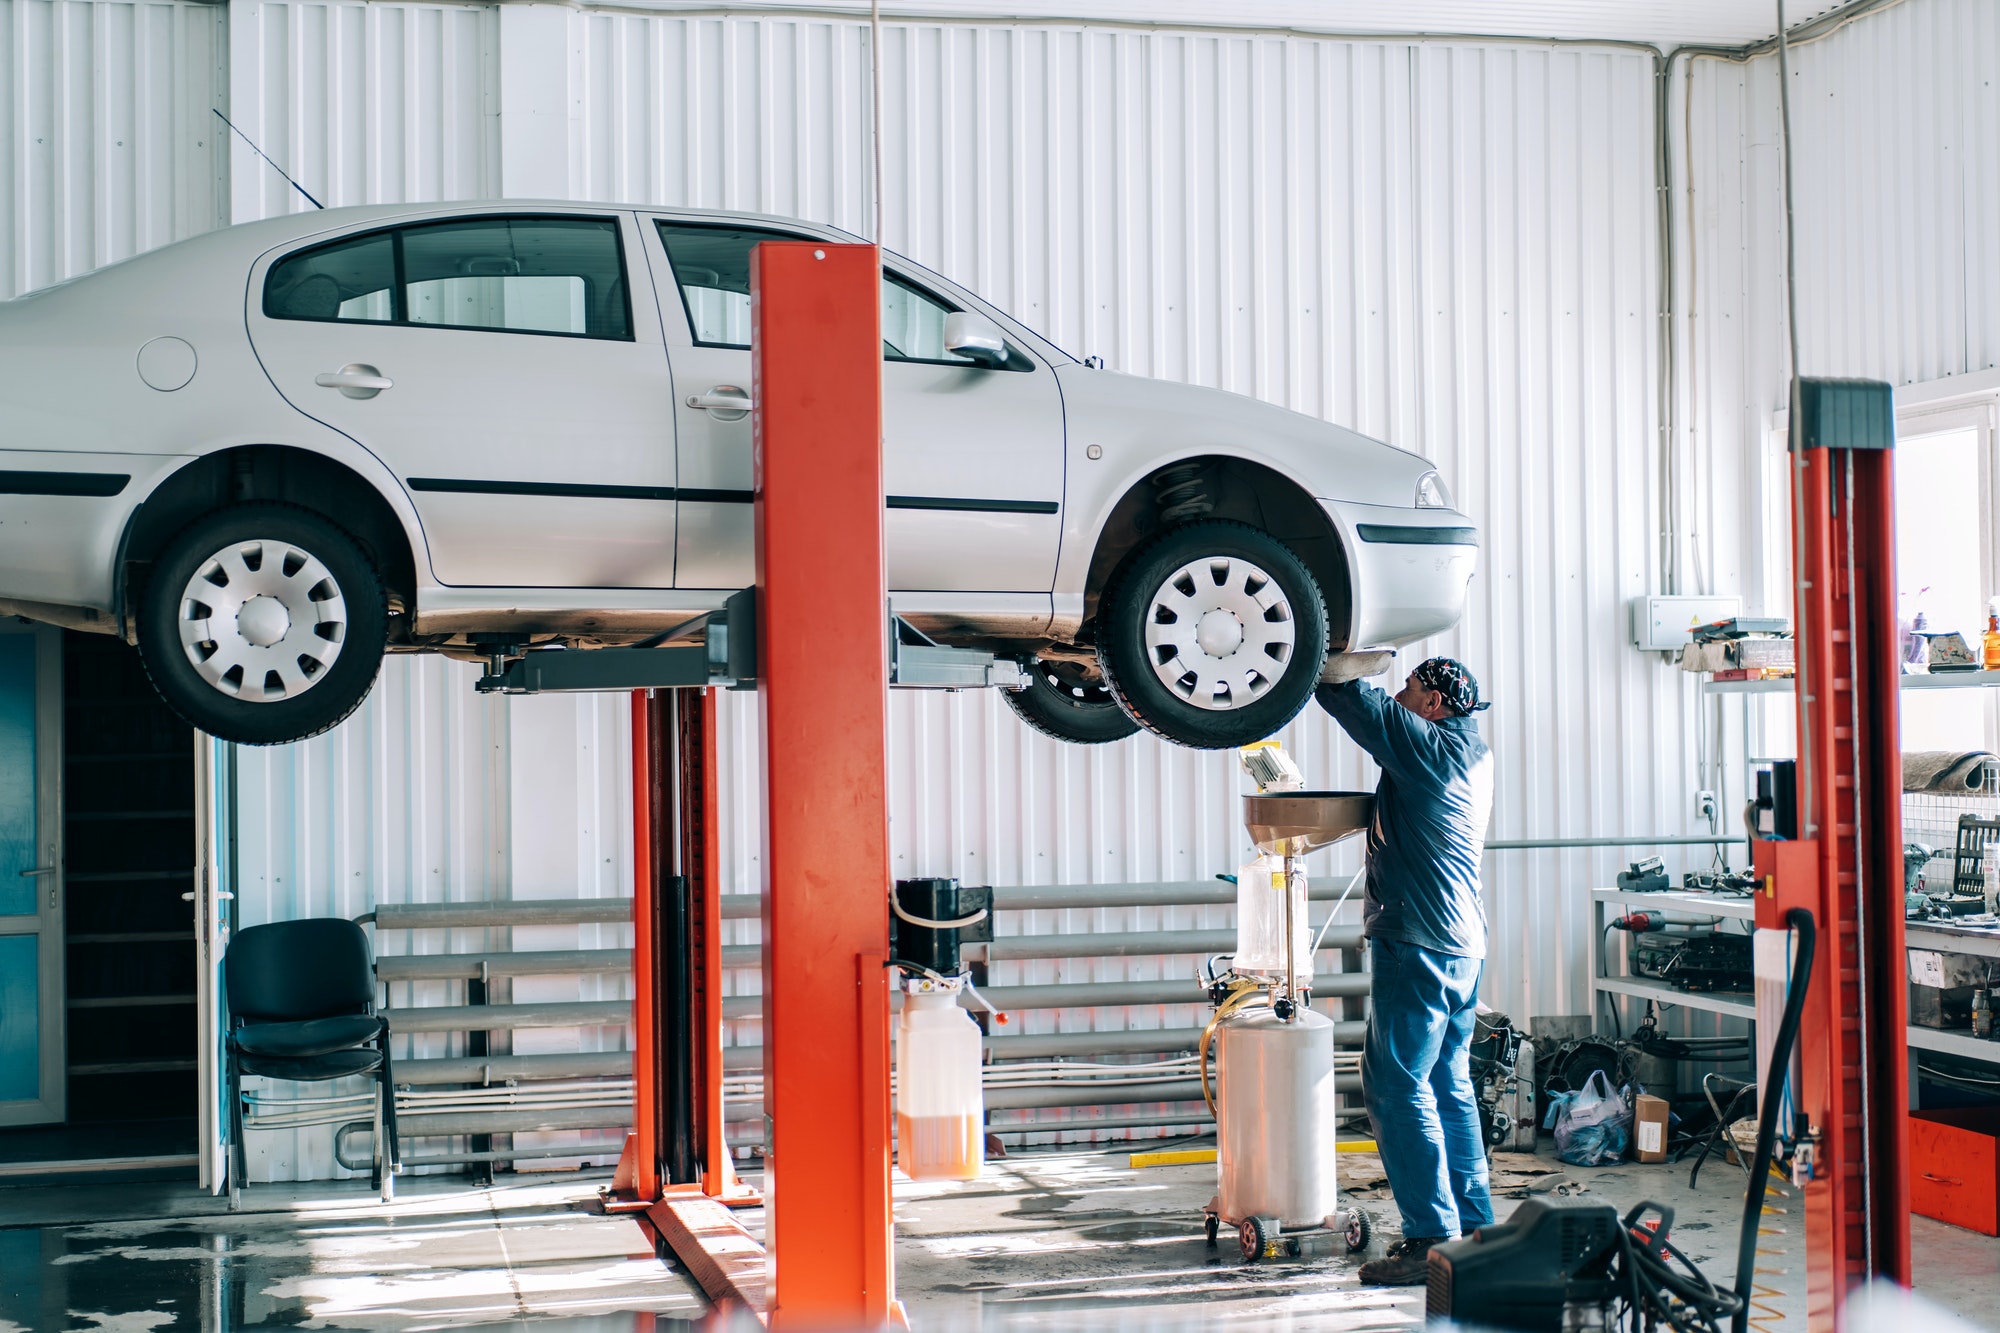 Car lifted on car lift for routine maintenance